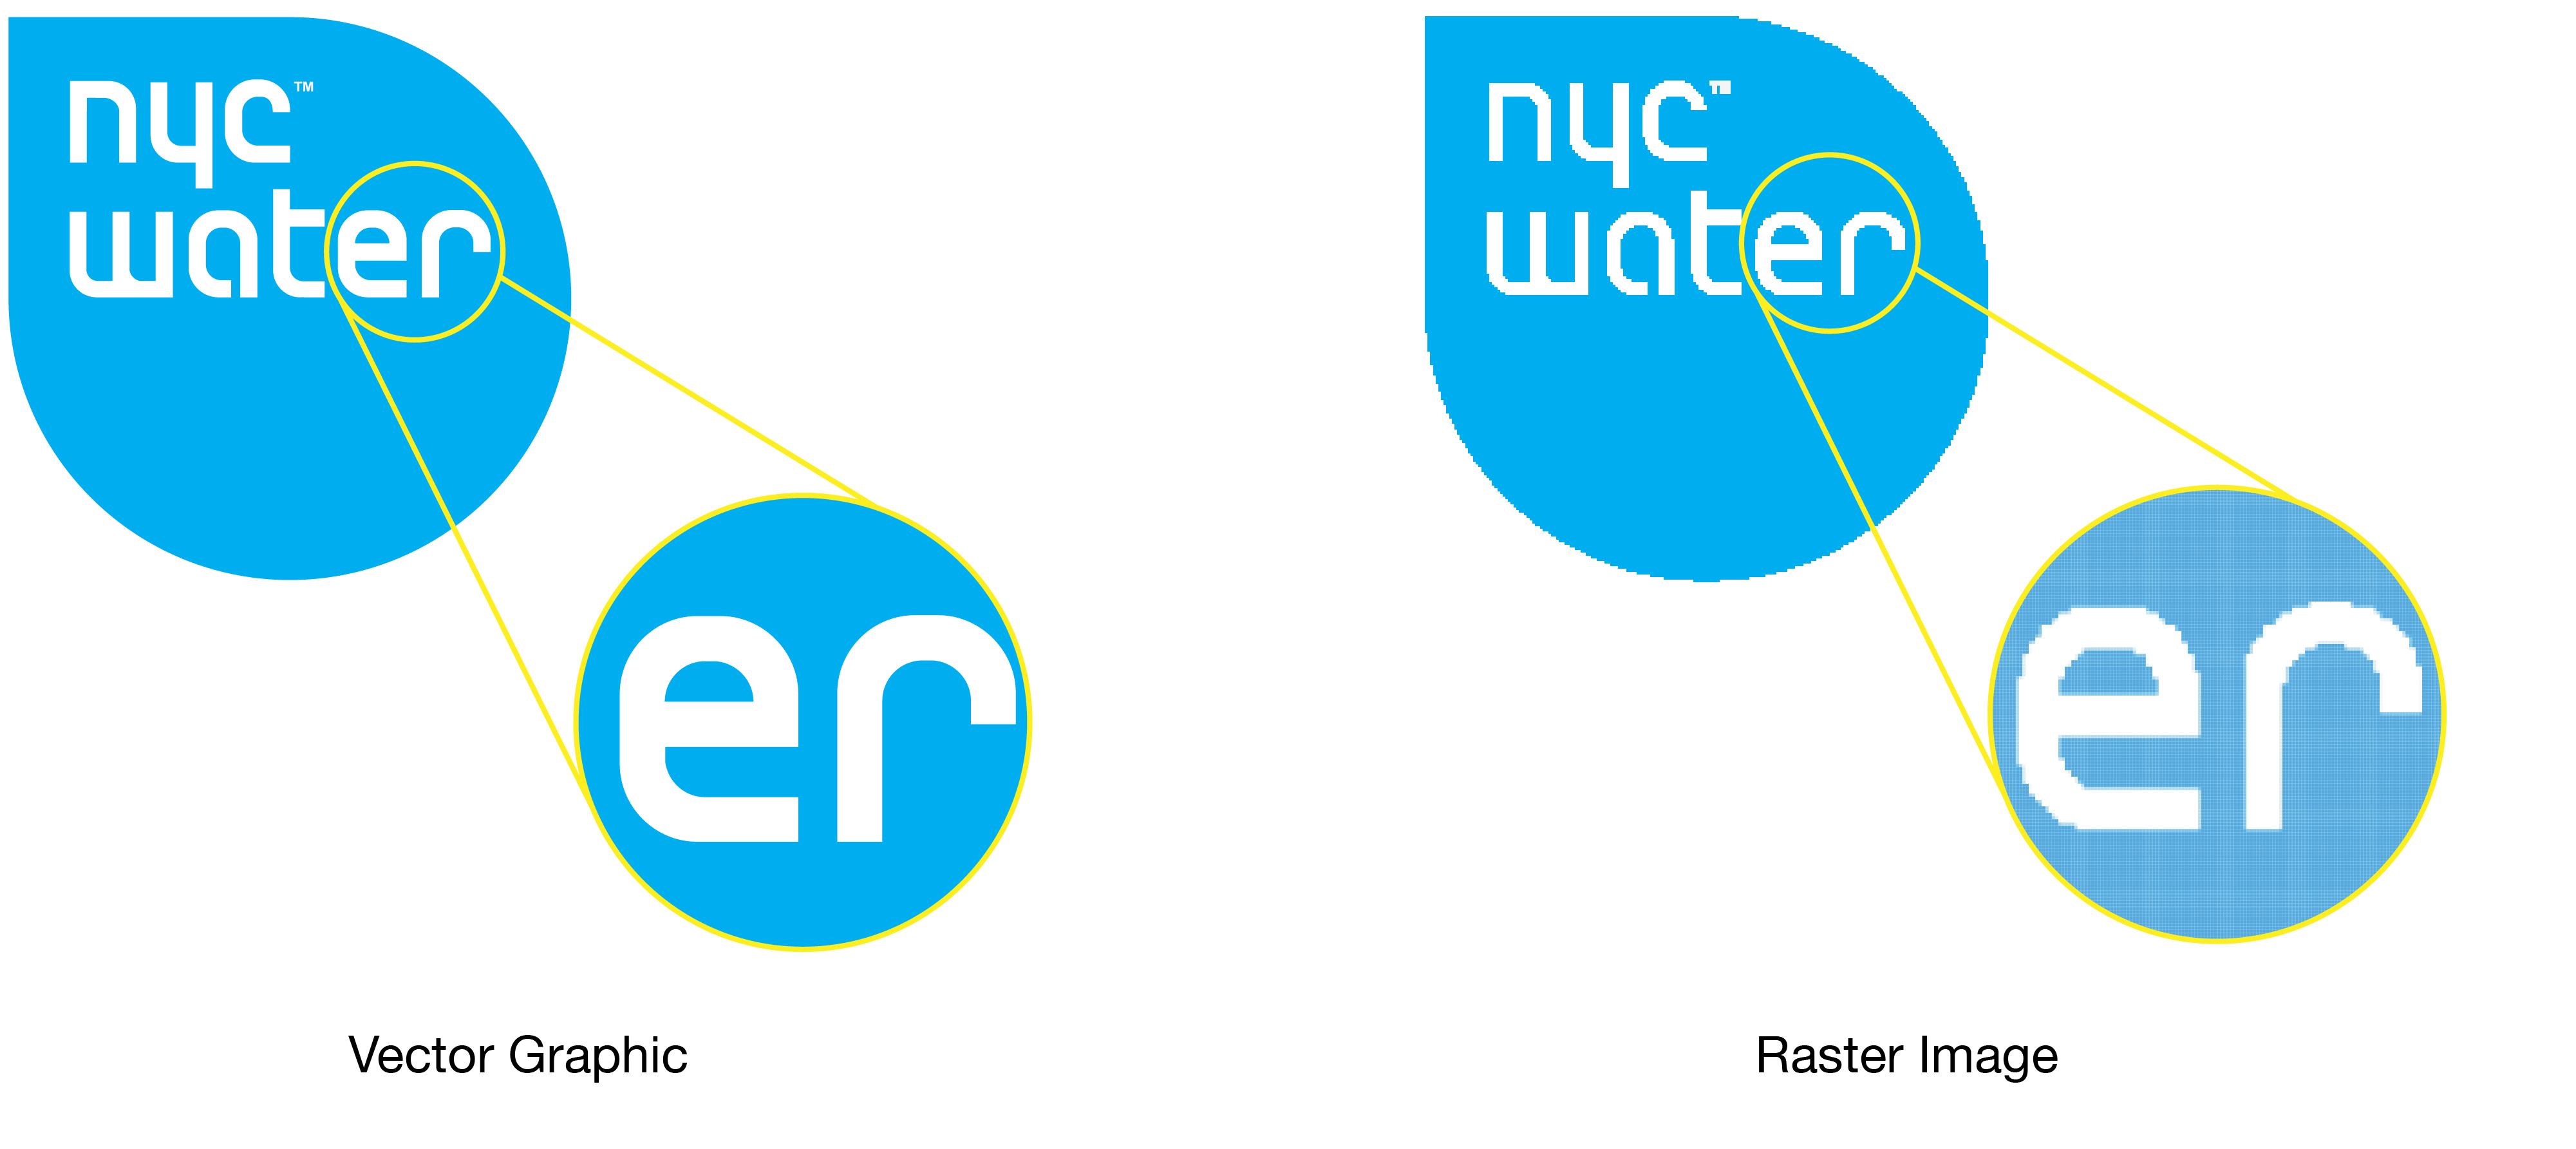 NYC Water graphics being used to compare vector and raster images